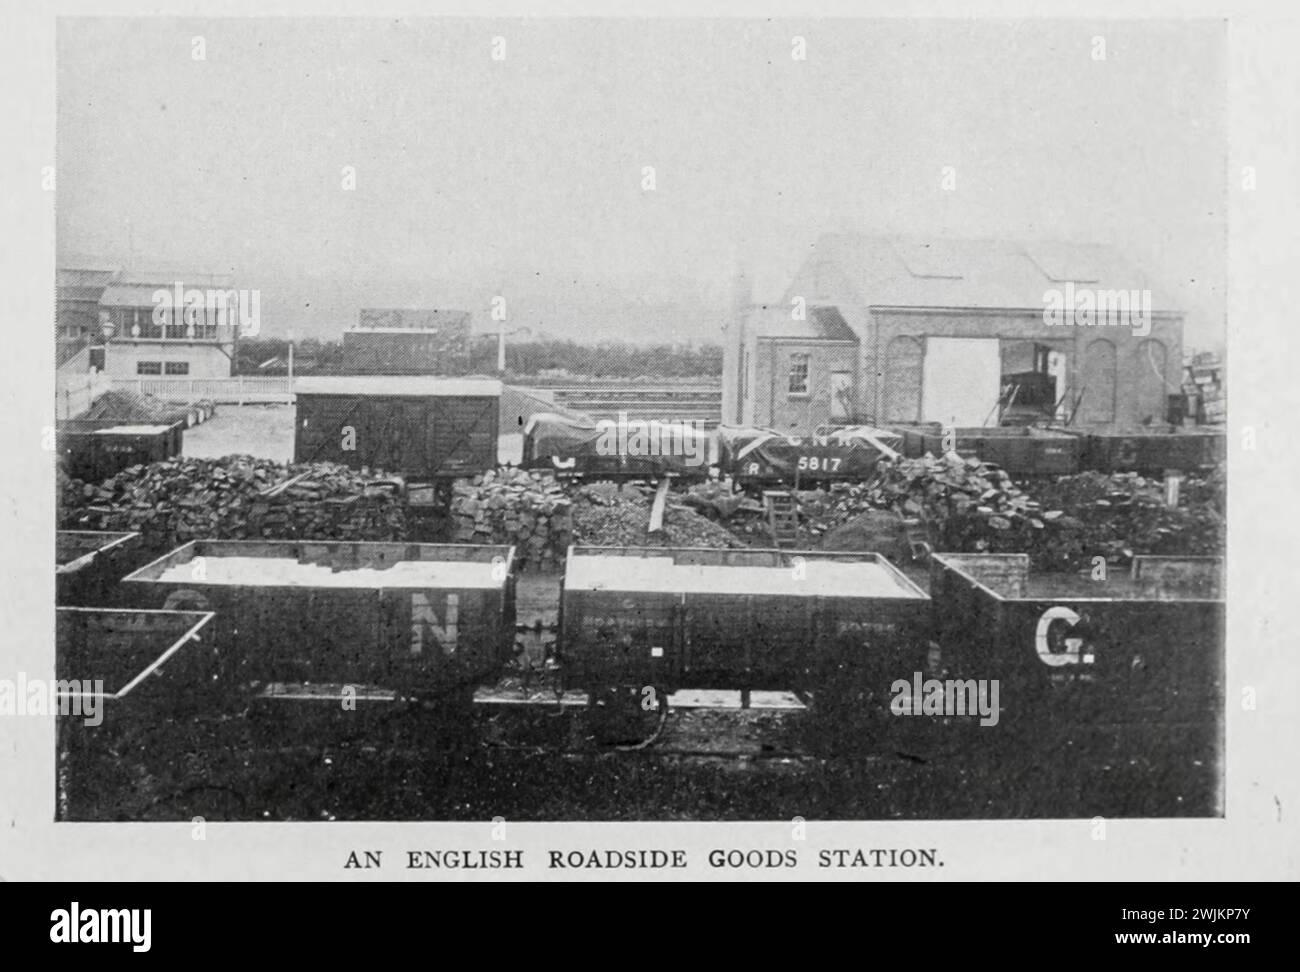 AN ENGLISH ROADSIDE GOODS STATION. from the Article ENGLISH GOODS STATIONS AND RAILWAY YARDS. By Arch. R. Whitehead. from The Engineering Magazine Devoted to Industrial Progress Volume XIV October 1897 - March 1898 The Engineering Magazine Co Stock Photo